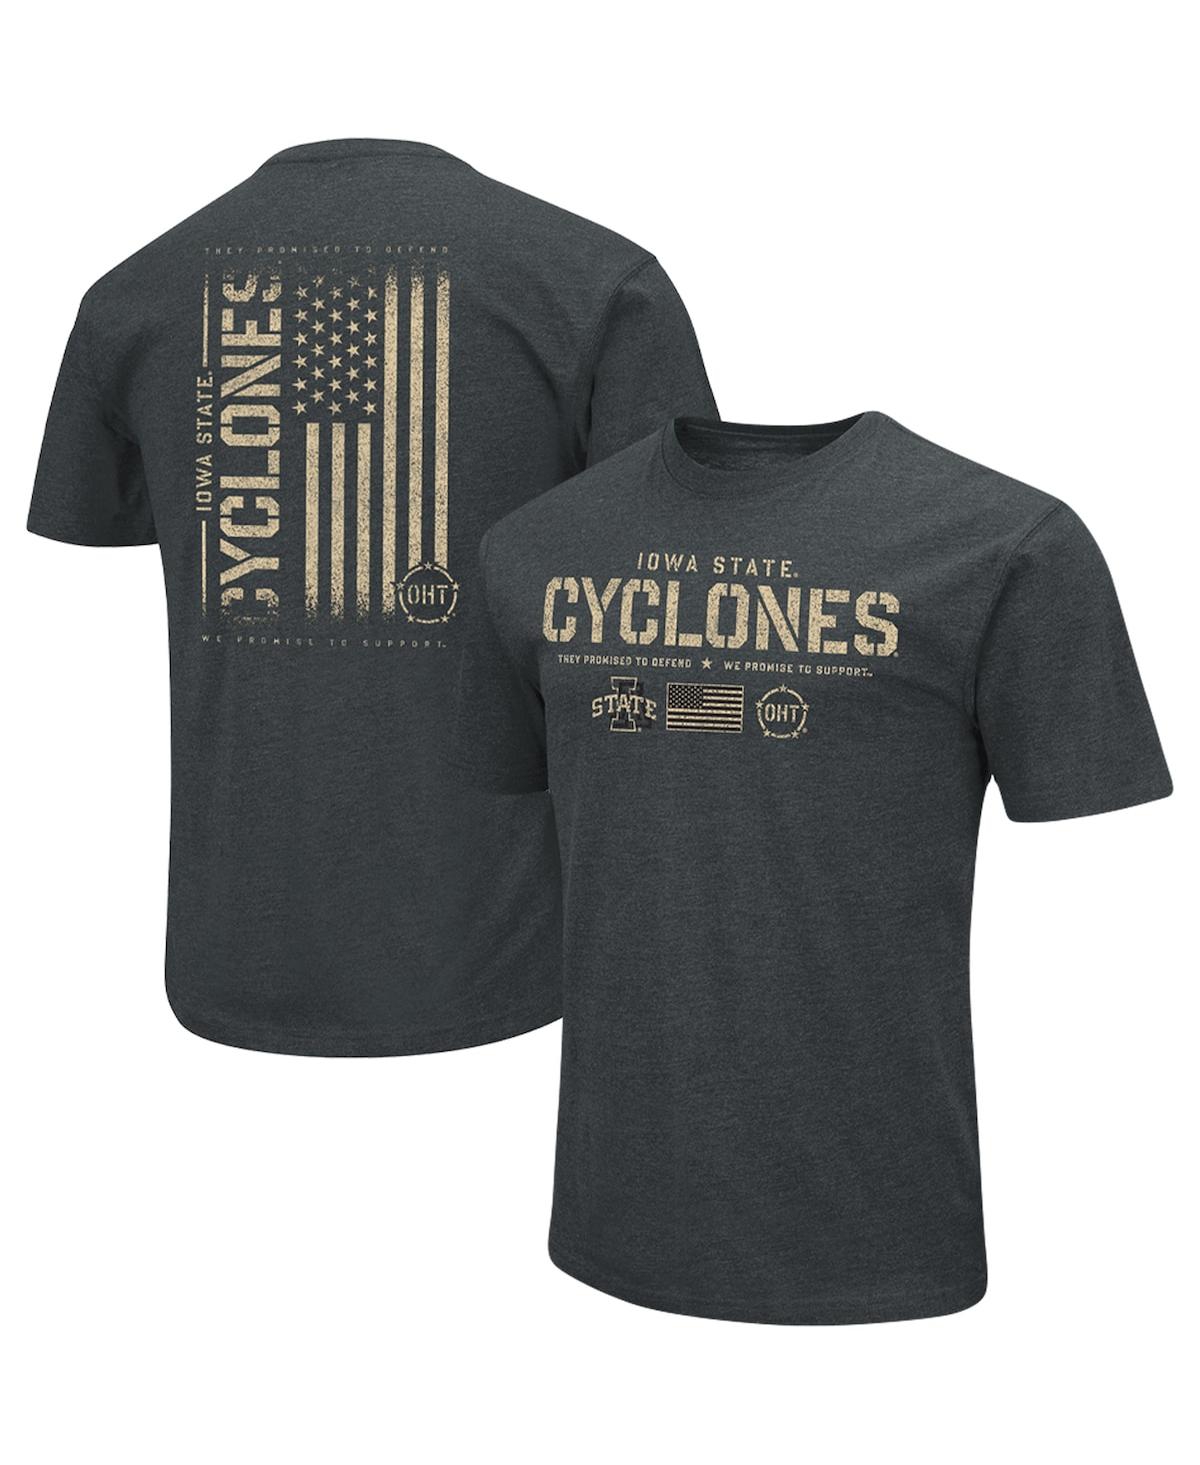 Men's Colosseum Heathered Black Iowa State Cyclones Oht Military-Inspired Appreciation Flag 2.0 T-shirt - Heathered Black